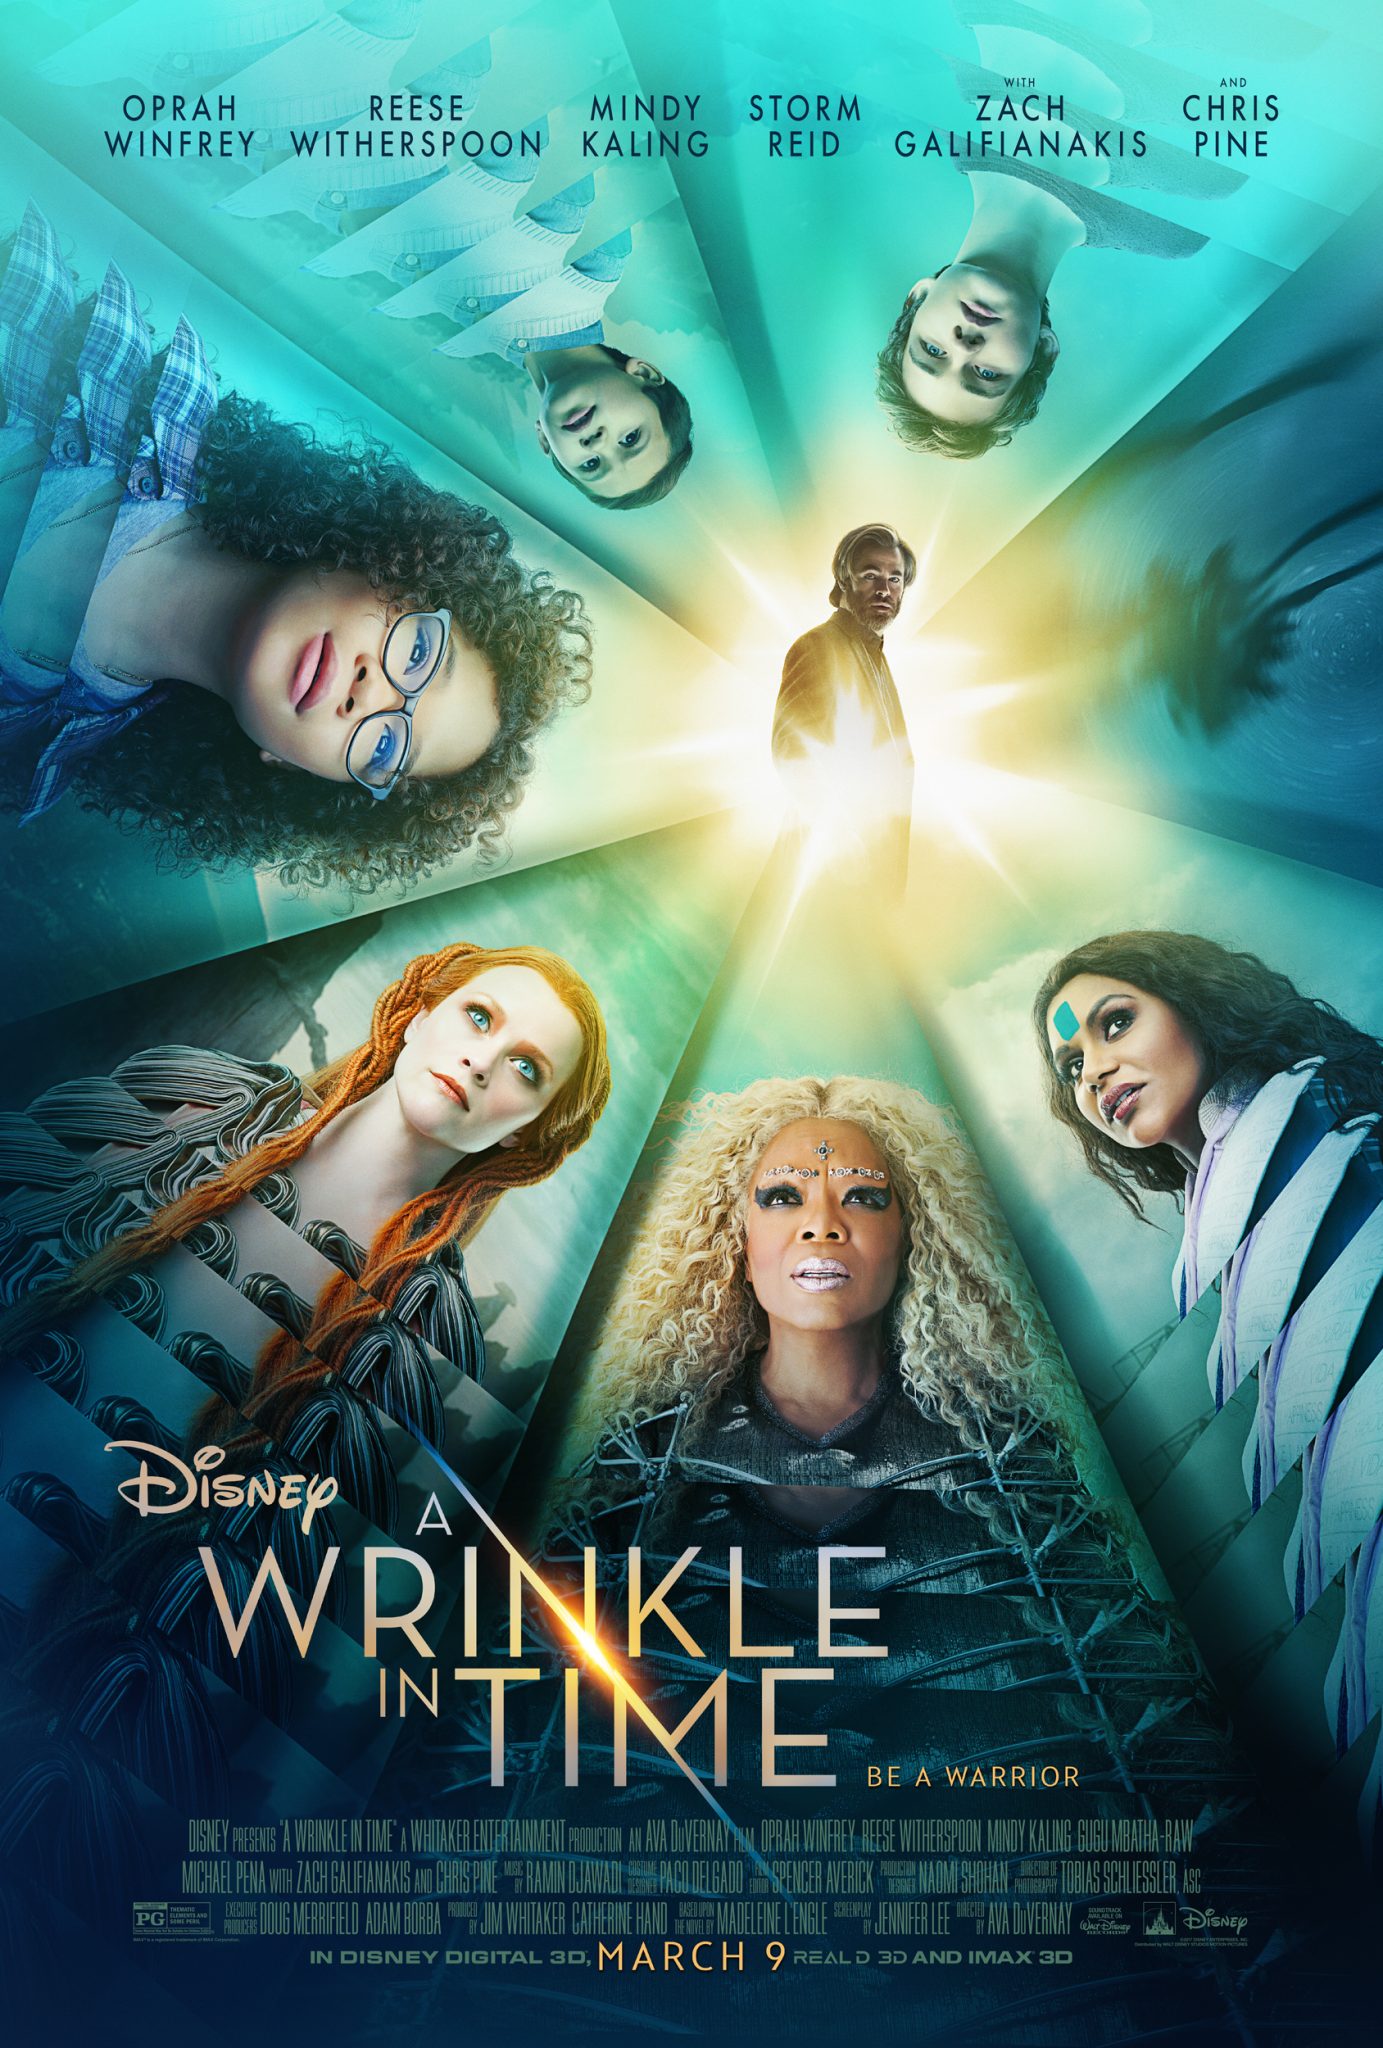 New Movie: A Wrinkle In Time (New Poster & Trailer)